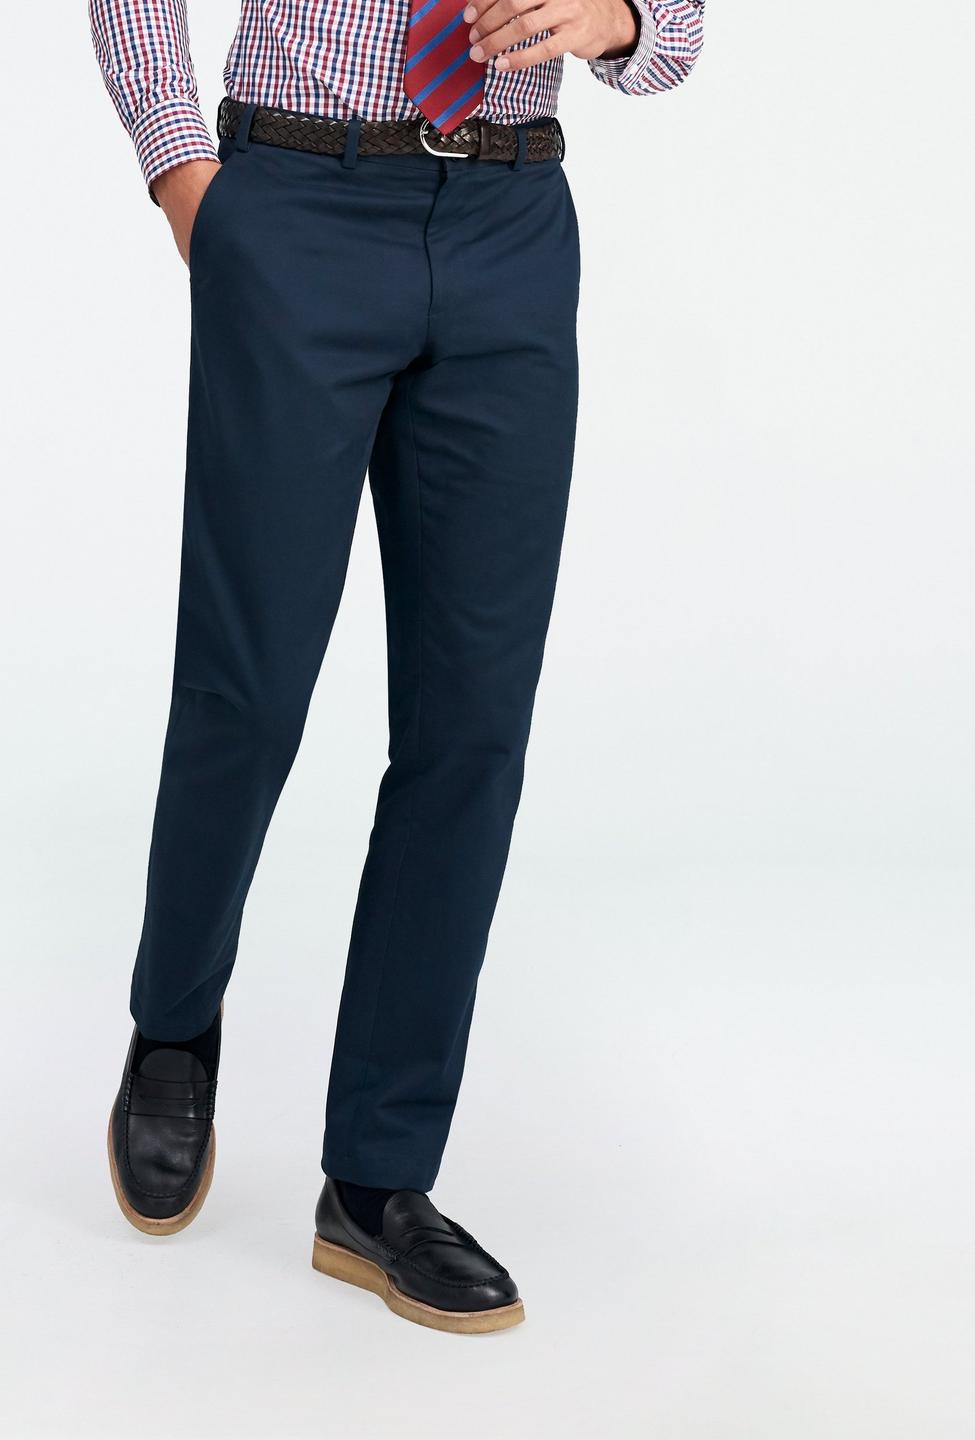 Navy pants - Houndslow Solid Design from Premium Indochino Collection